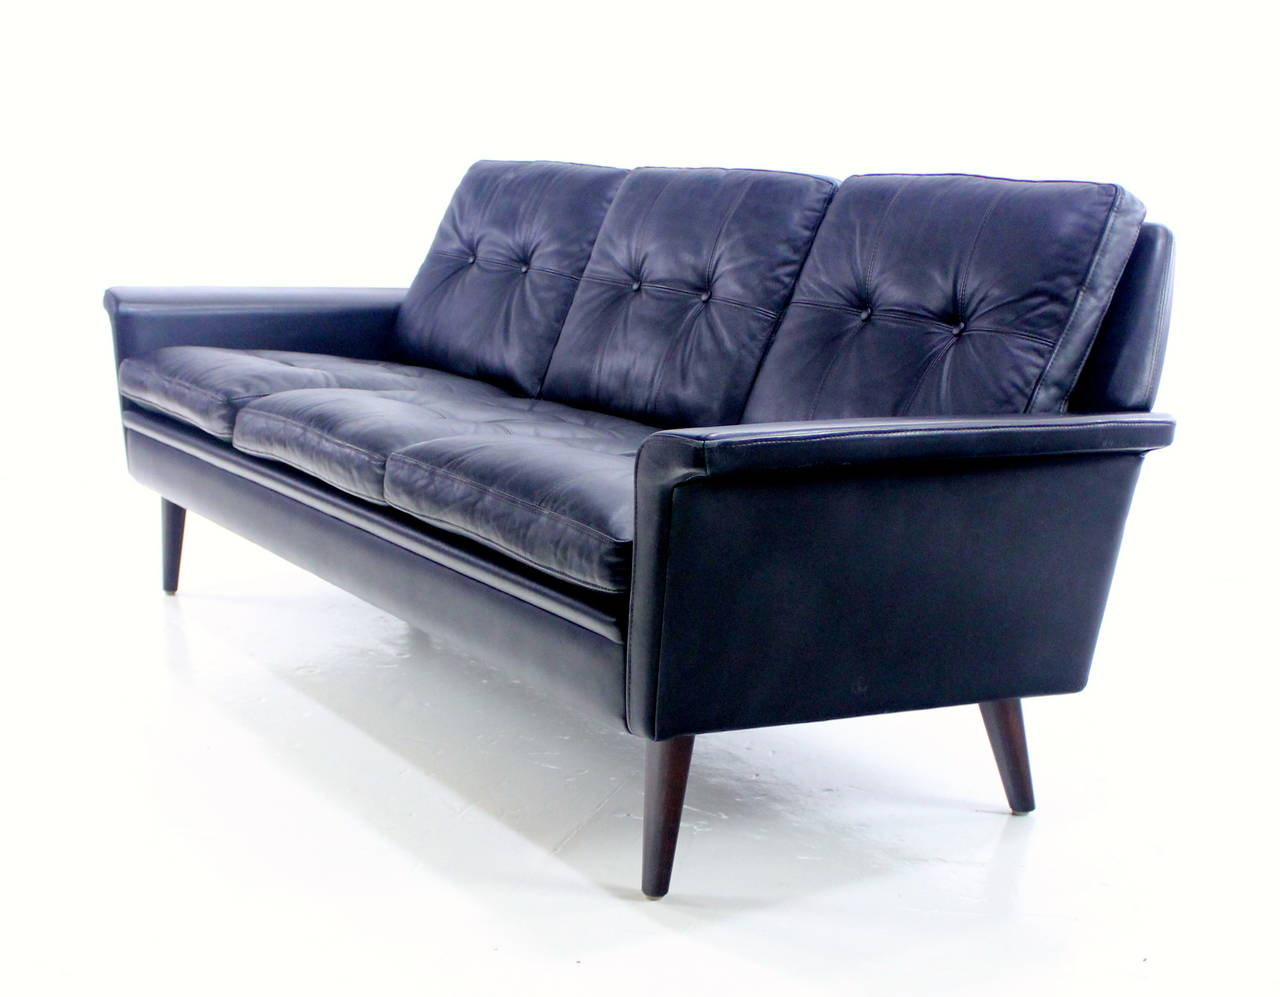 Classic danish modern three-place sofa.
Original black leather upholstery. Rosewood legs.
Built for maximum comfort and style.
Professionally restored and refinished by LookModern.
Matchless quality and price.
Low freight and quick ship.